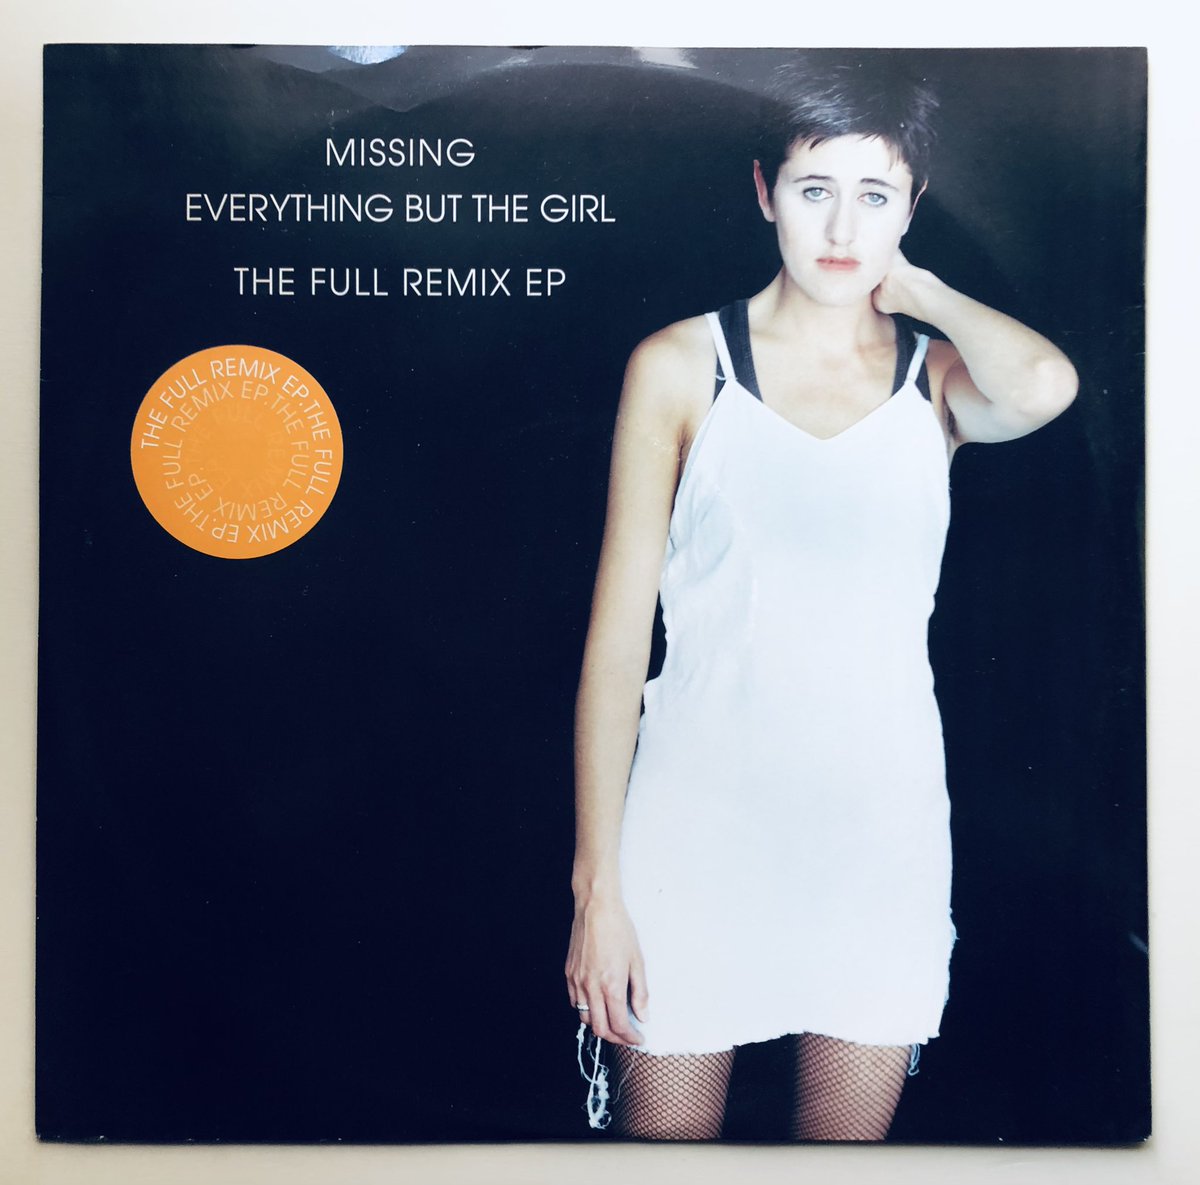 Everything But The Girl – Missing (The Full Remix EP)
#12inchsingle #vinylrecords 
Remix by Ultramarine, Chris & James, Little Joey
リリースは1994年か、タイムレスな感じで好きな曲。